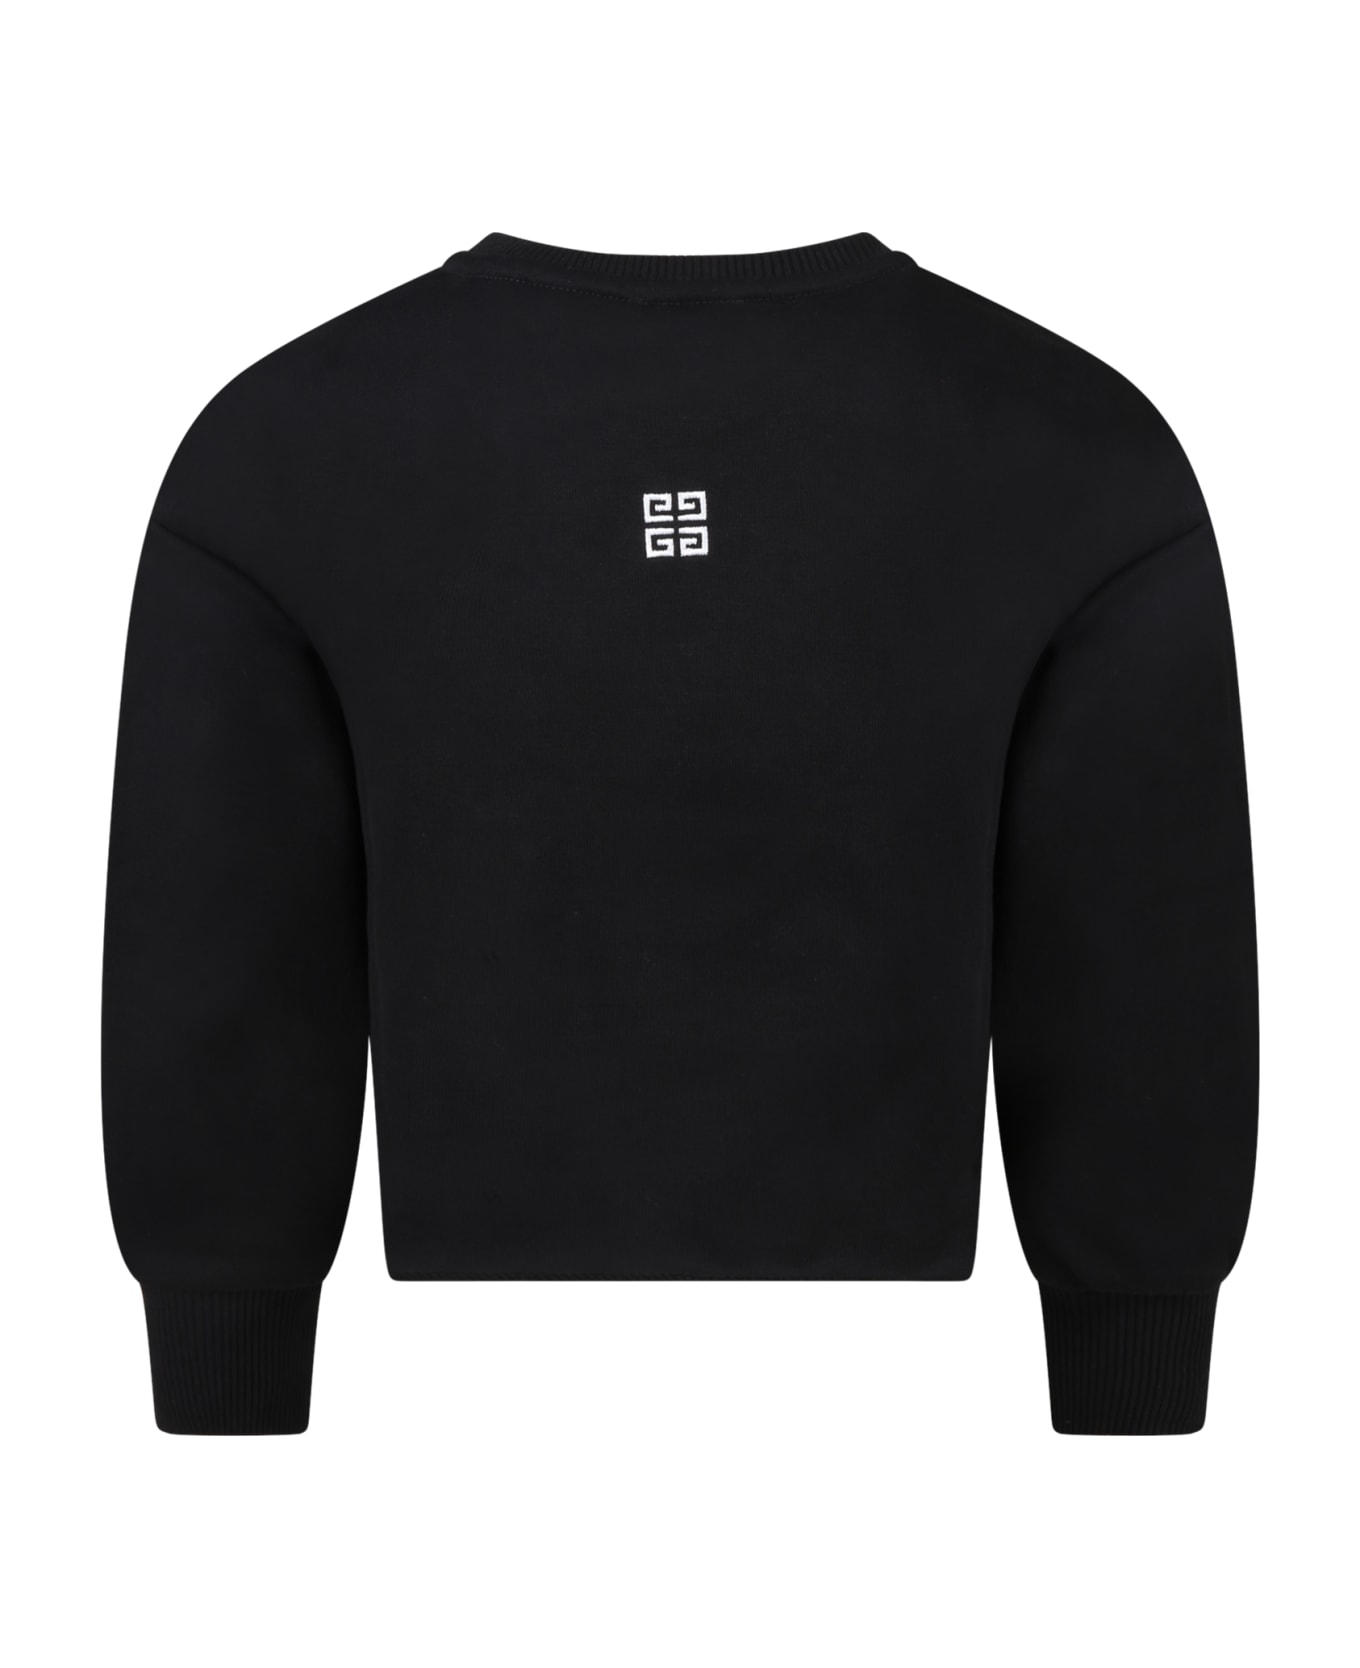 Givenchy Black Sweatshirt For Girl With White Logo - Black